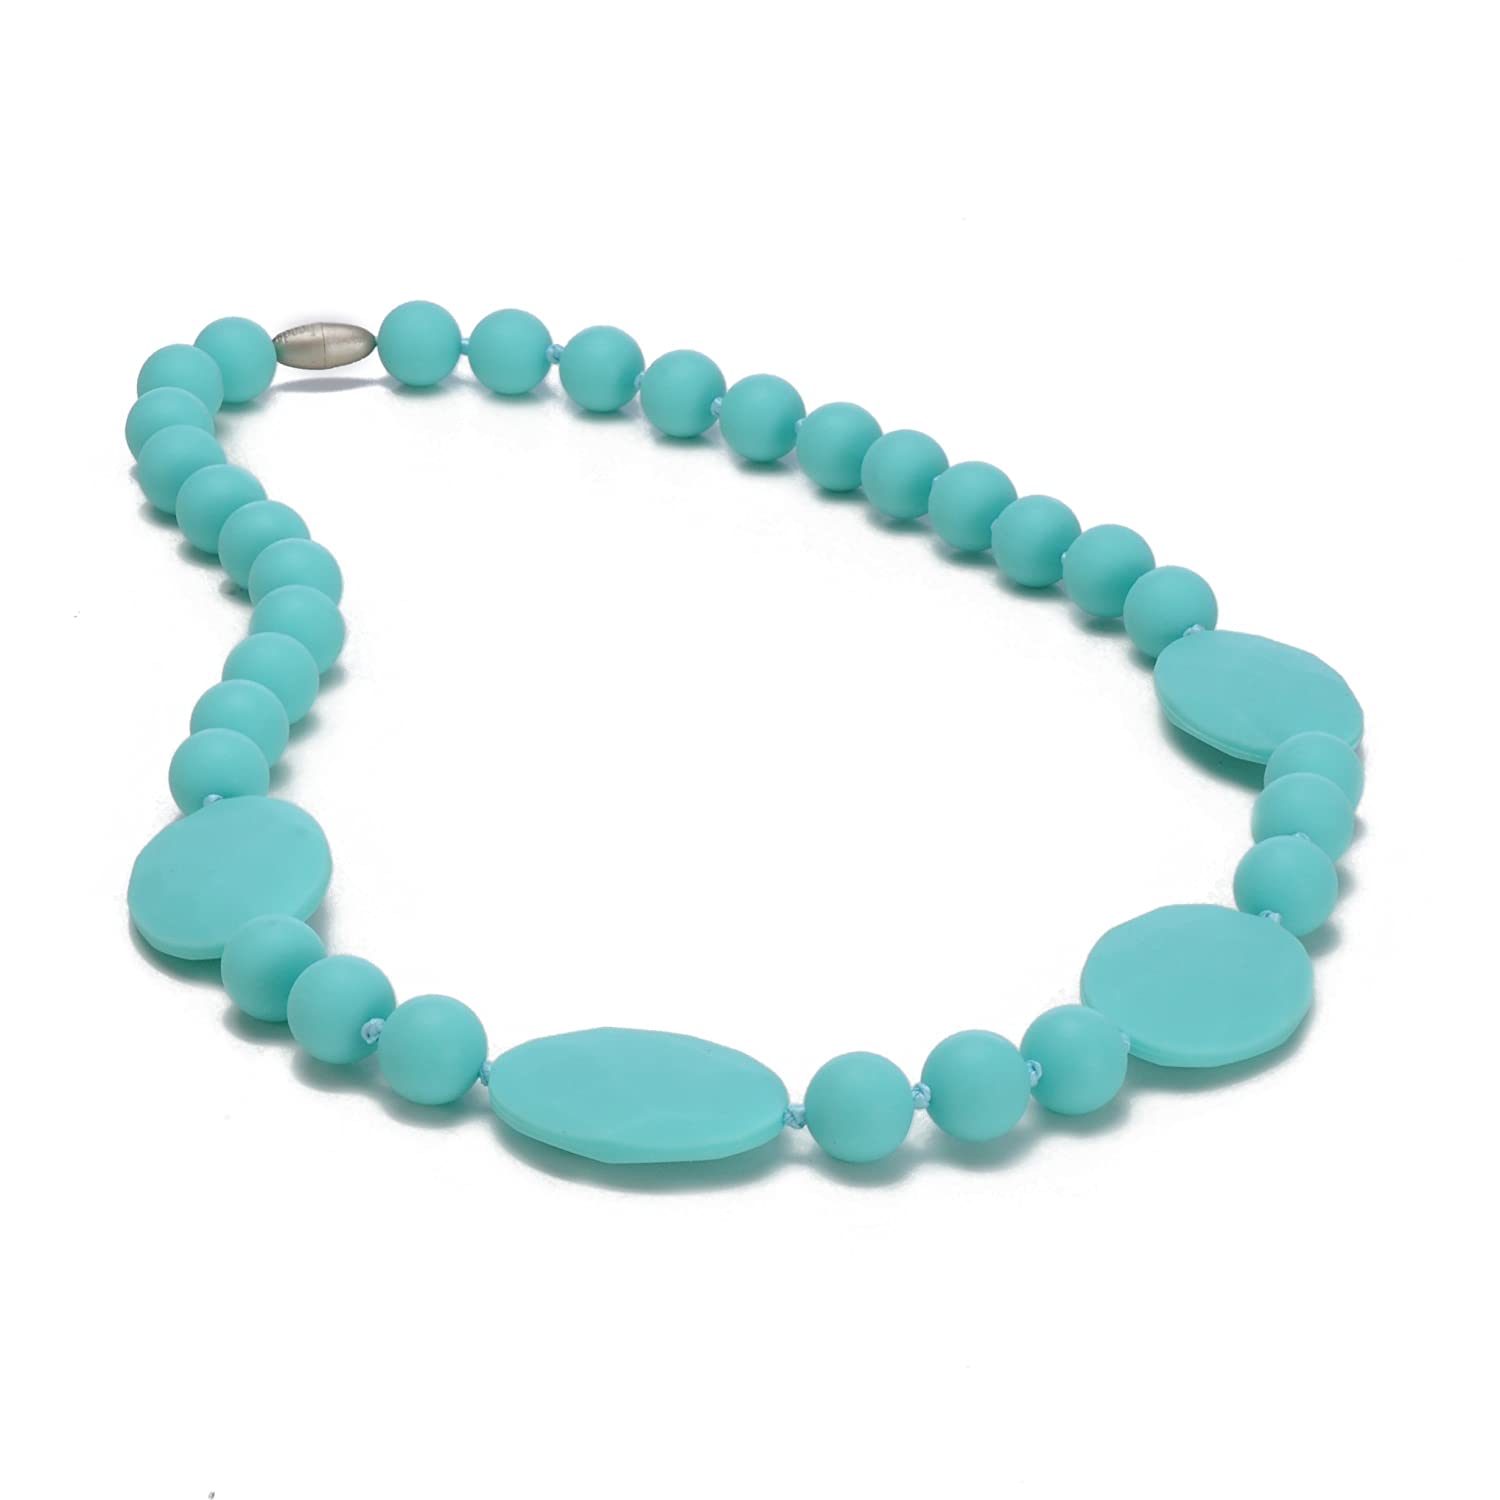 Chewbeads Necklace - Perry -Turquoise